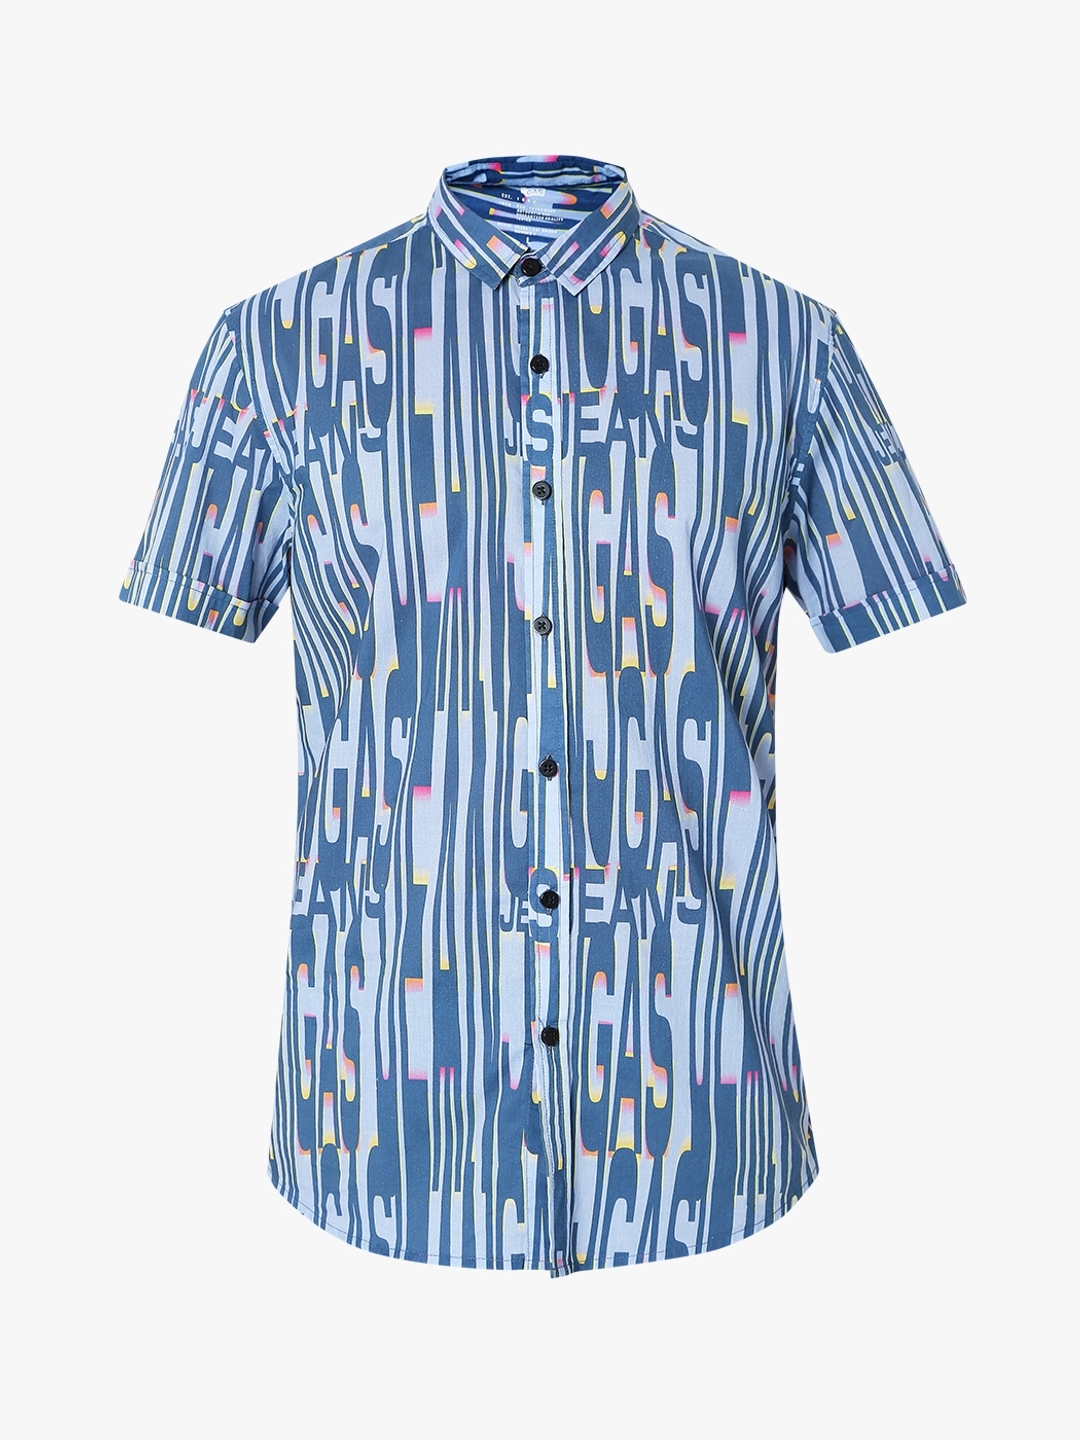 Brand Print Slim Fit Shirt with Spread Collar